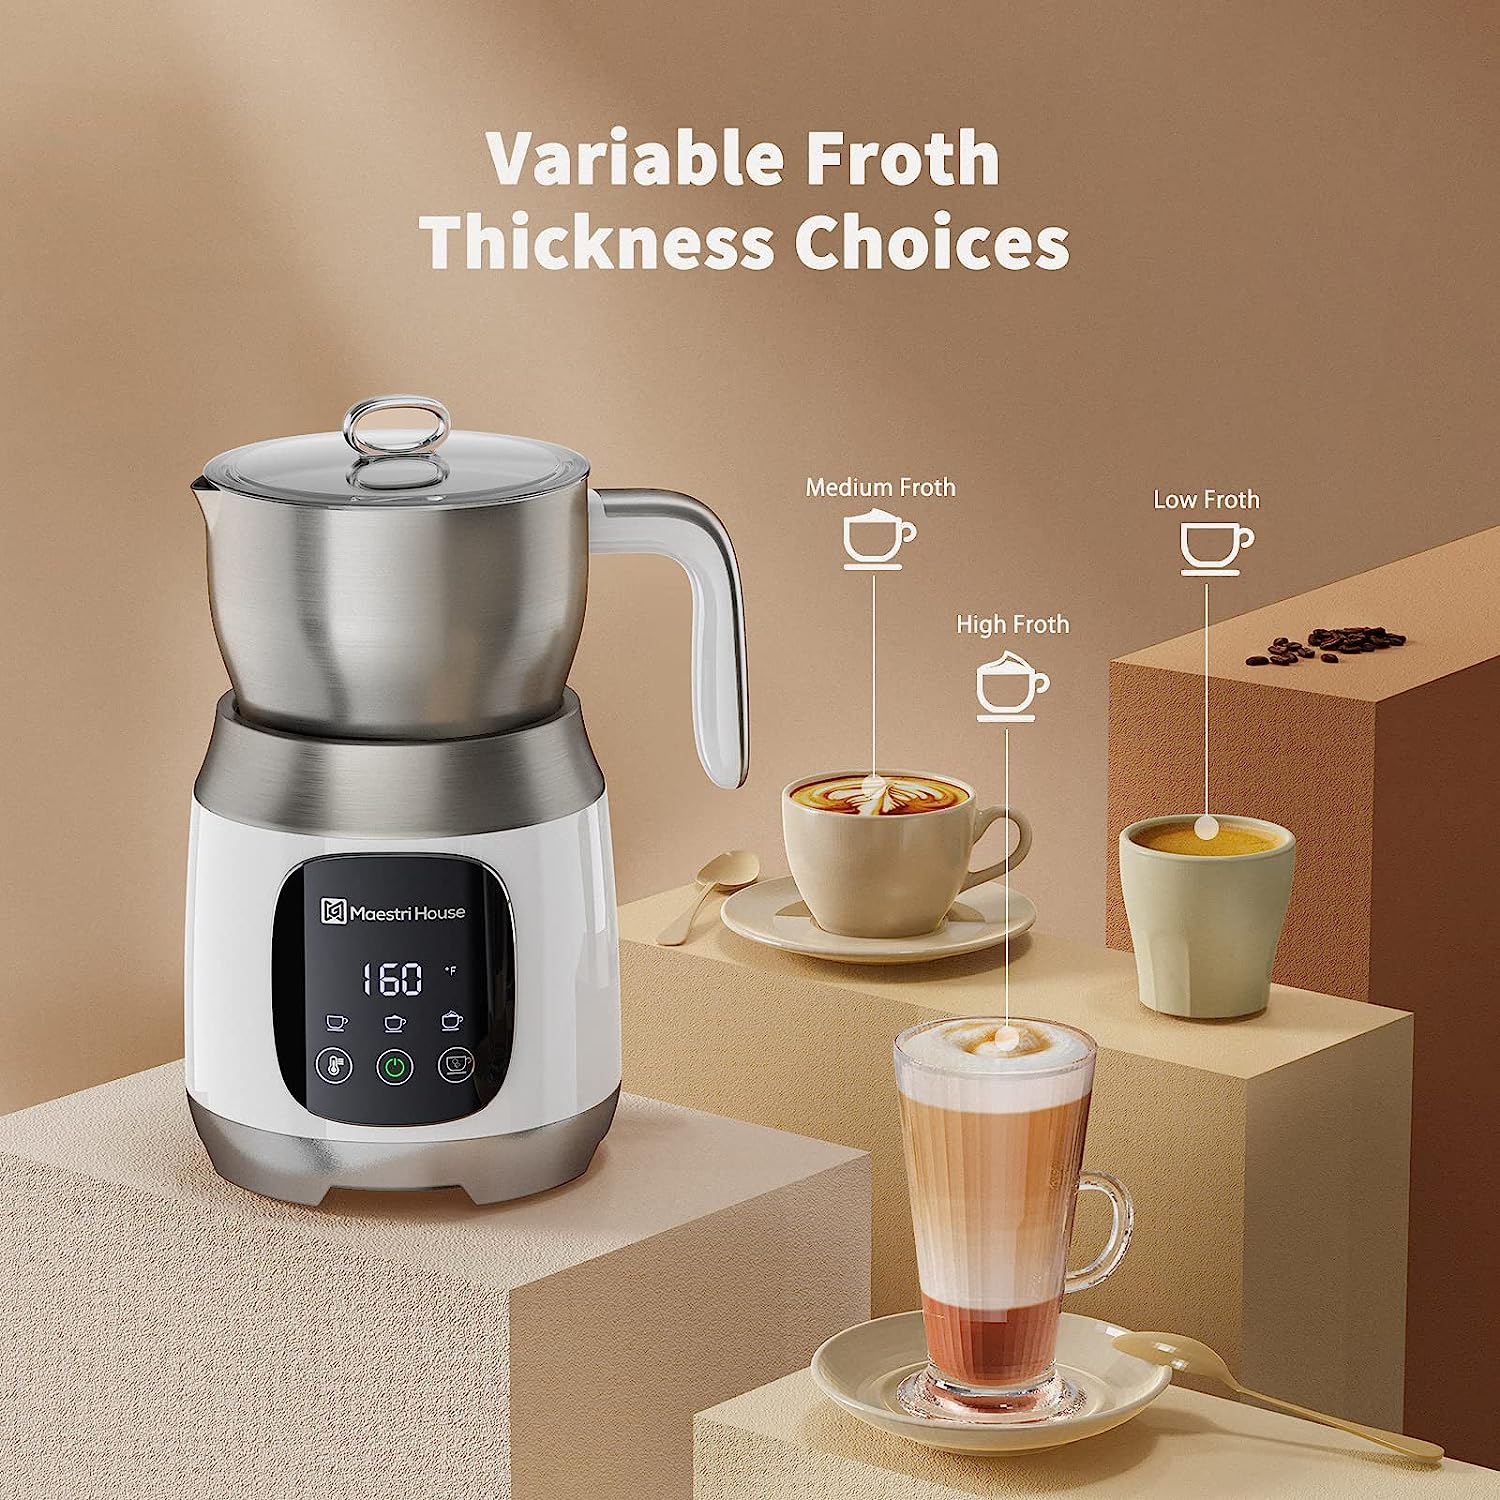 Maestri House MMF-9304-W 21oz Smart Touch Control,Variable Temp and Froth Thickness Detachable Milk Frother White